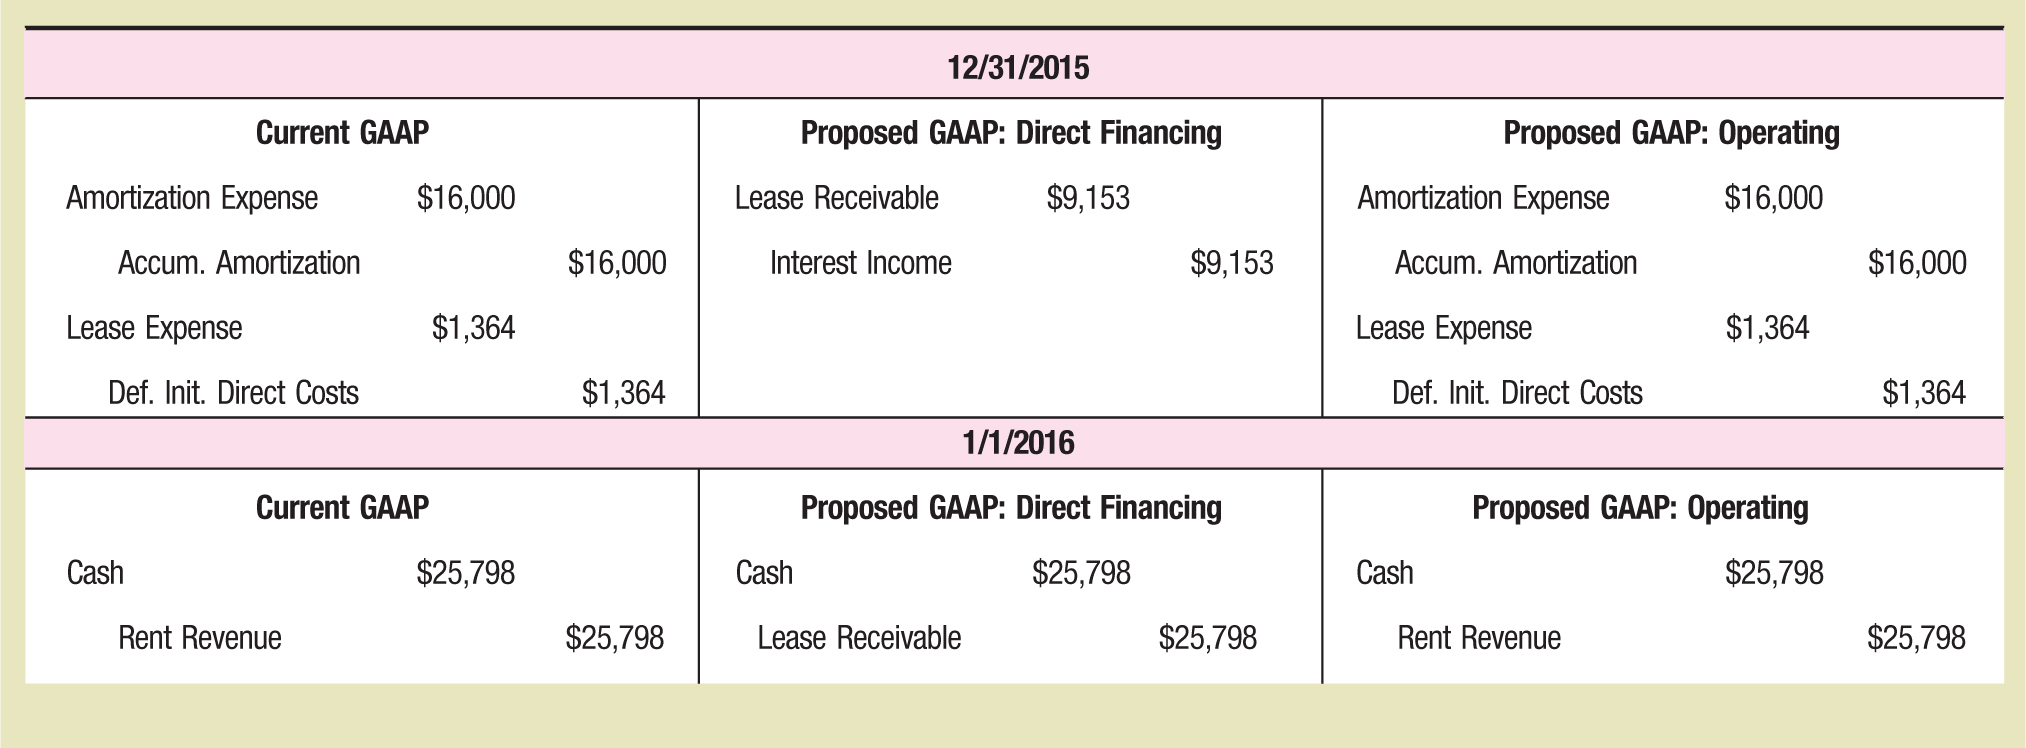  12/31/2015 Current GAAP Proposed GAAP: Direct Financing Proposed GAAP: Operating Amortization Expense $16,000 Lease Receivable $9,153 Amortization Expense $16,000 Accum. Amortization $16,000 Interest Income $9,153 Accum. Amortization $16,000 Lease Expense $1,364 Lease Expense $1,364 Def. Init. Direct Costs $1,364 Def. Init. Direct Costs $1,364 1/1/2016 Current GAAP Proposed GAAP: Direct Financing Proposed GAAP: Operating Cash $25,798 Cash $25,798 Cash $25,798 Rent Revenue $25,798 Lease Receivable $25,798 Rent Revenue $25,798 